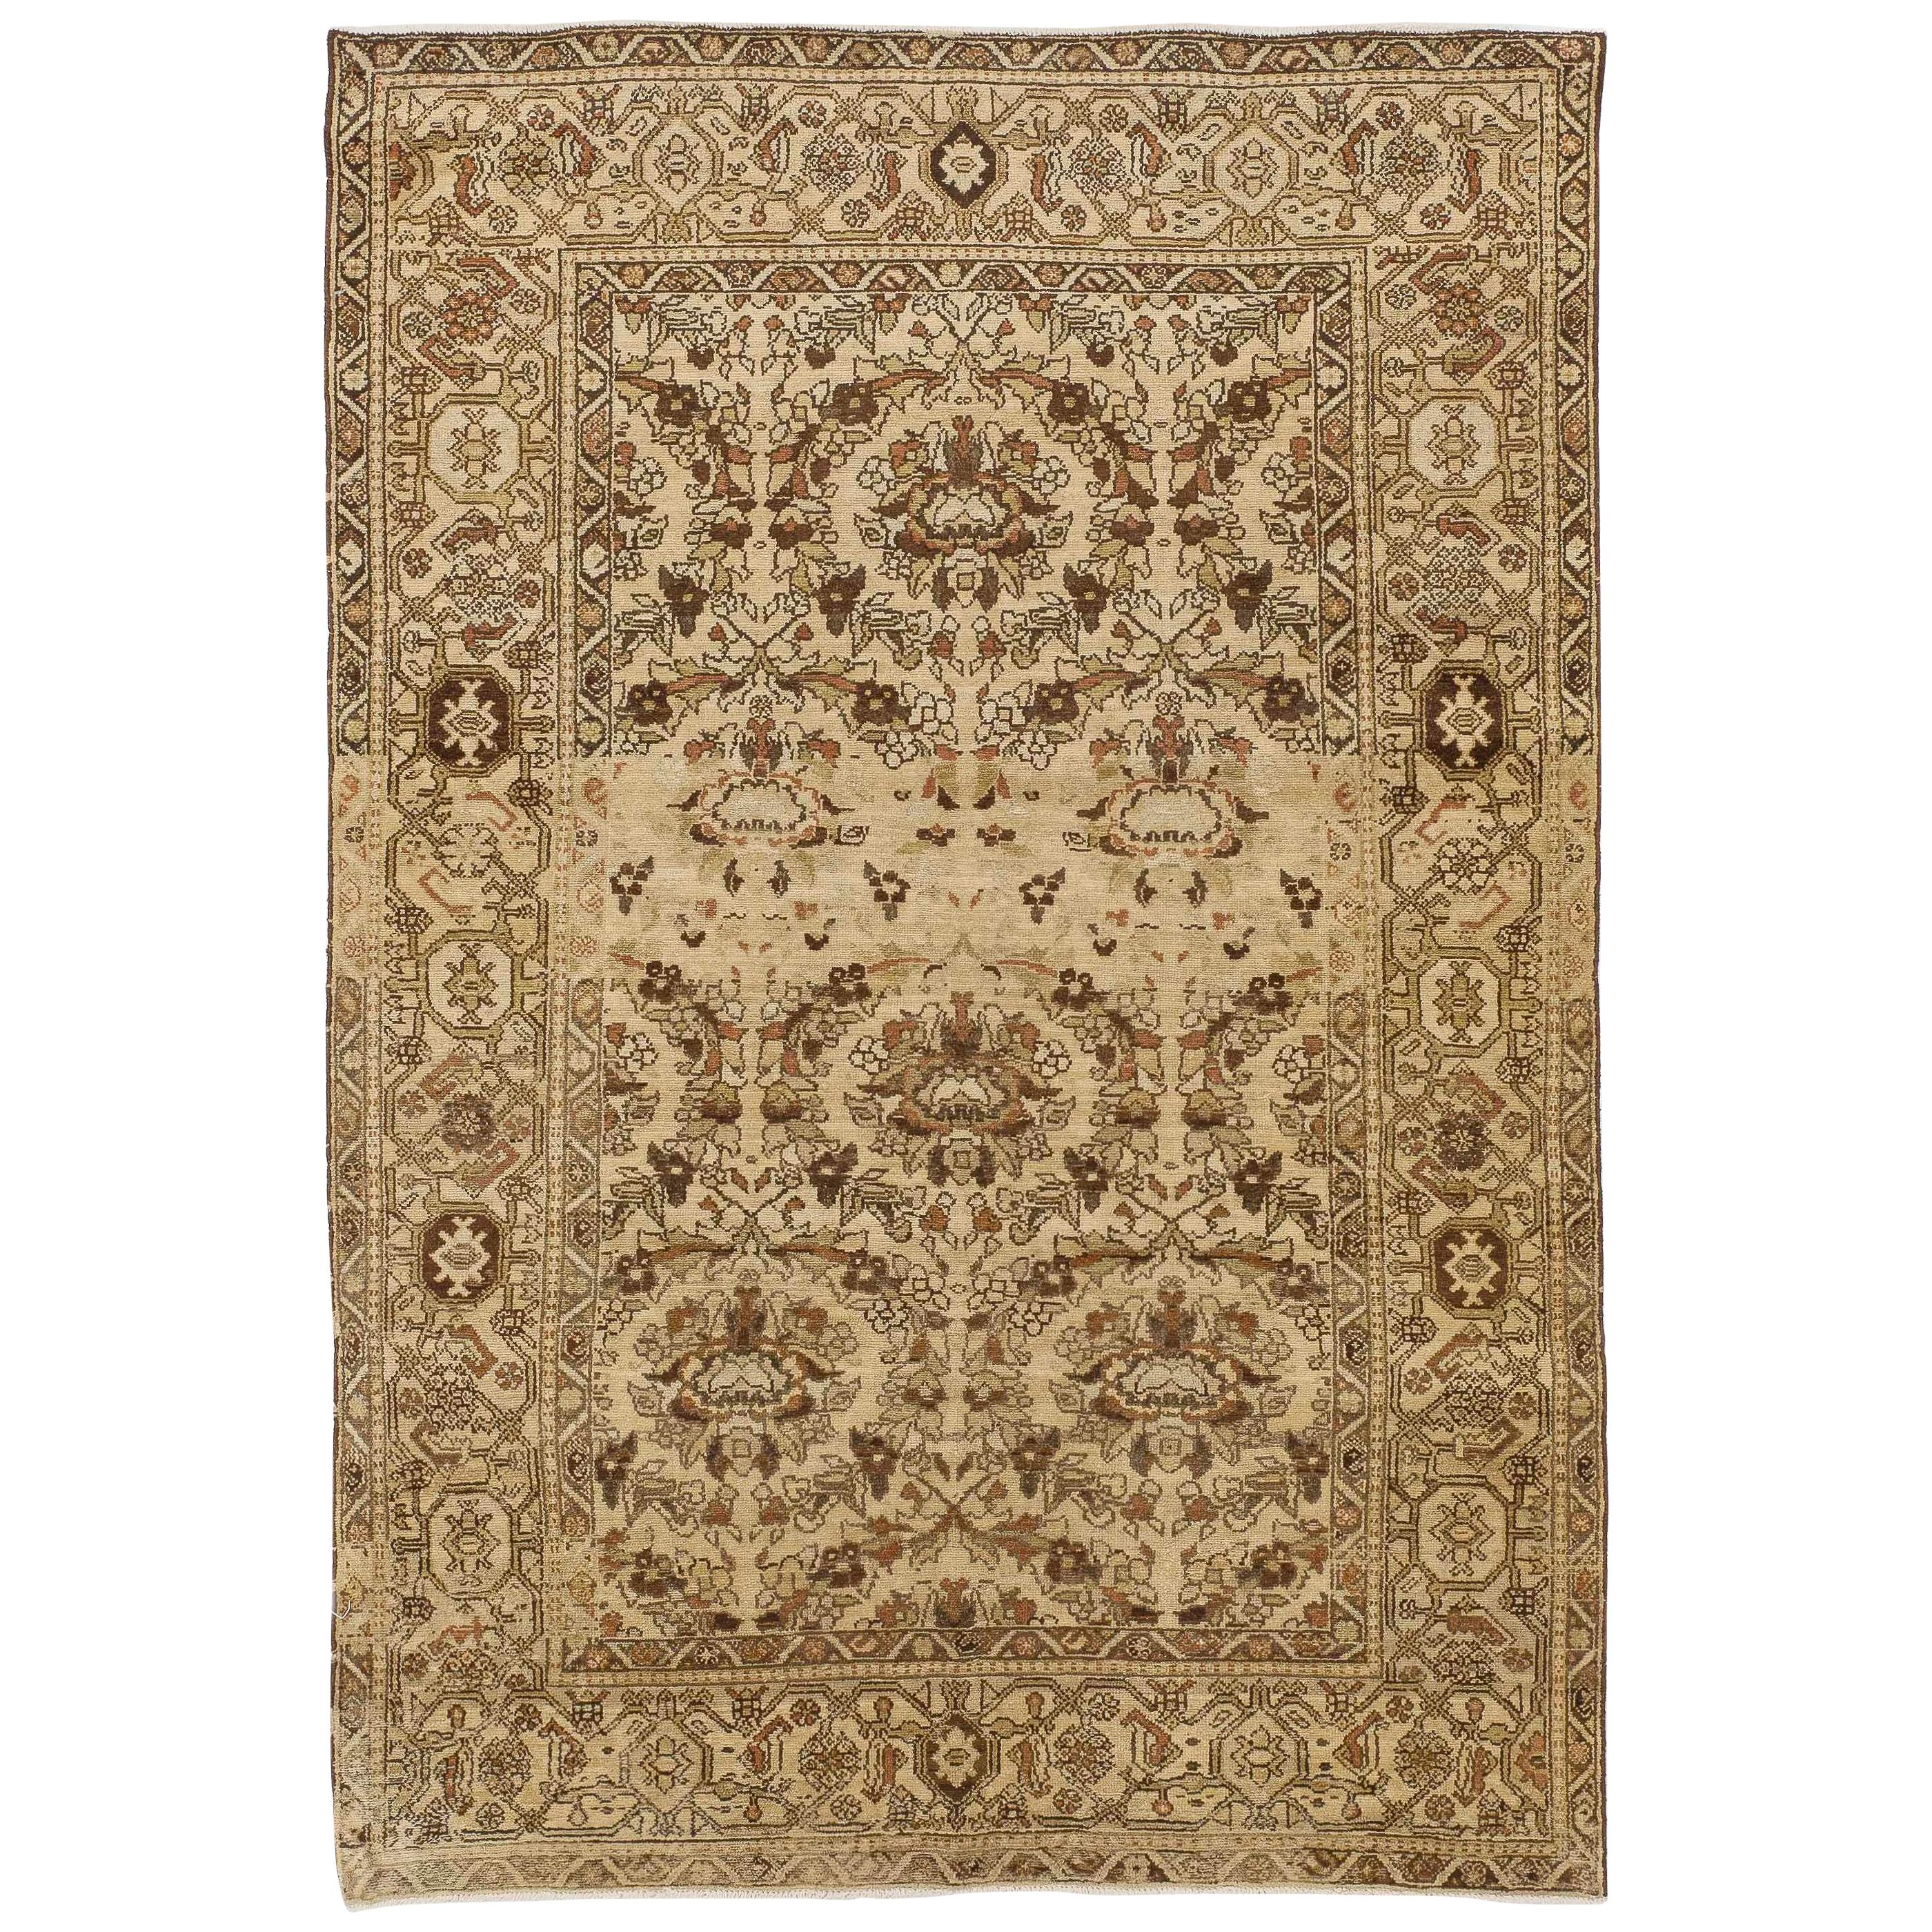 Antique Persian Malayer Rug with Brown and Black Floral Details on Ivory Field For Sale